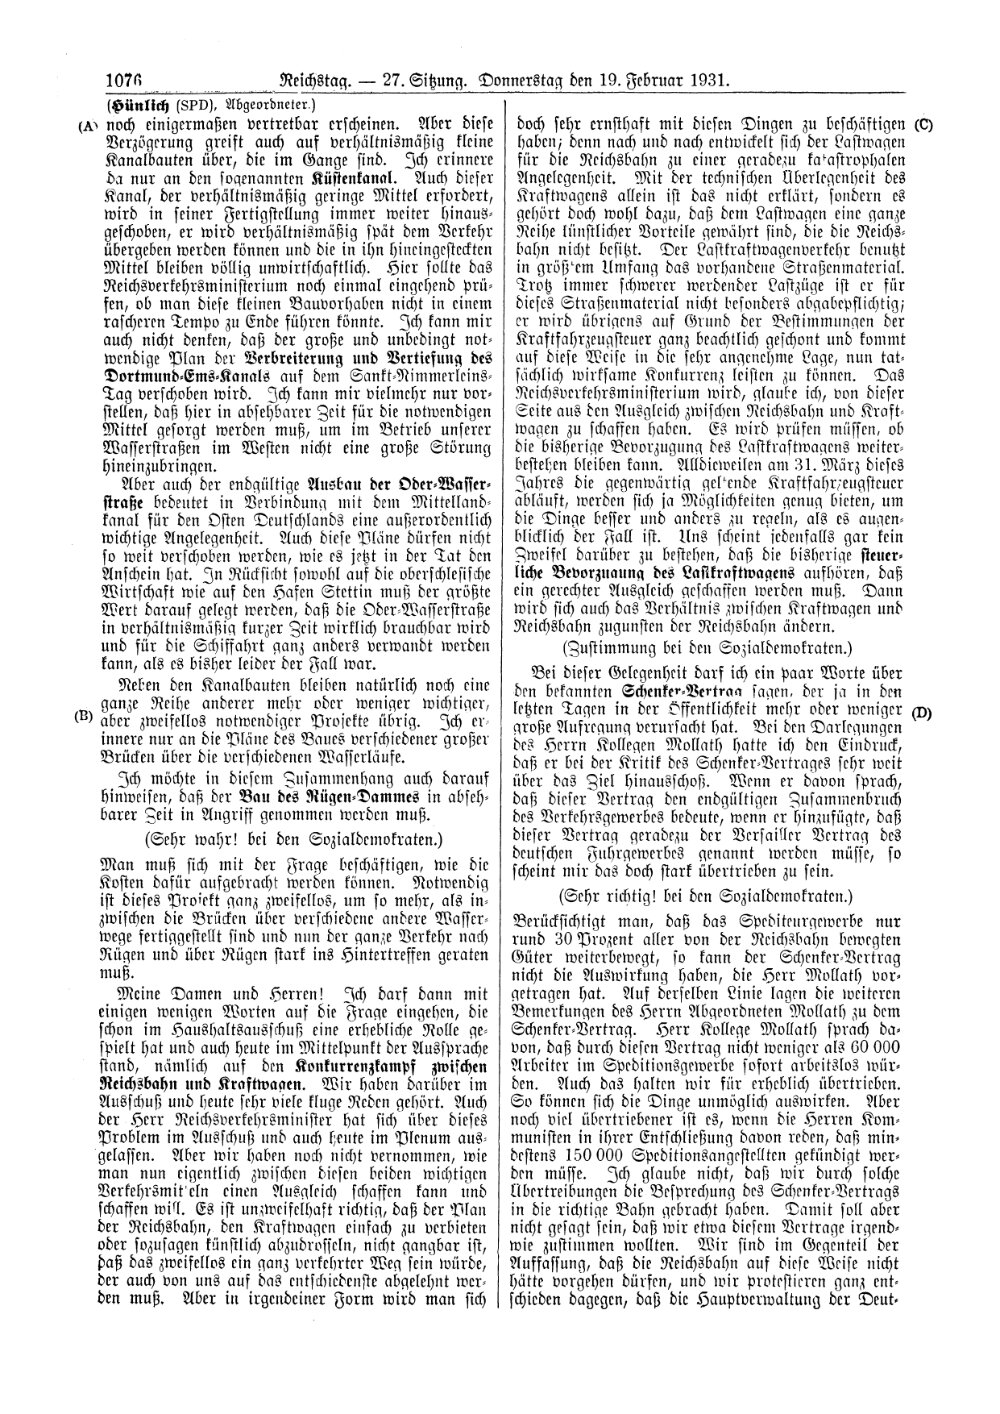 Scan of page 1076